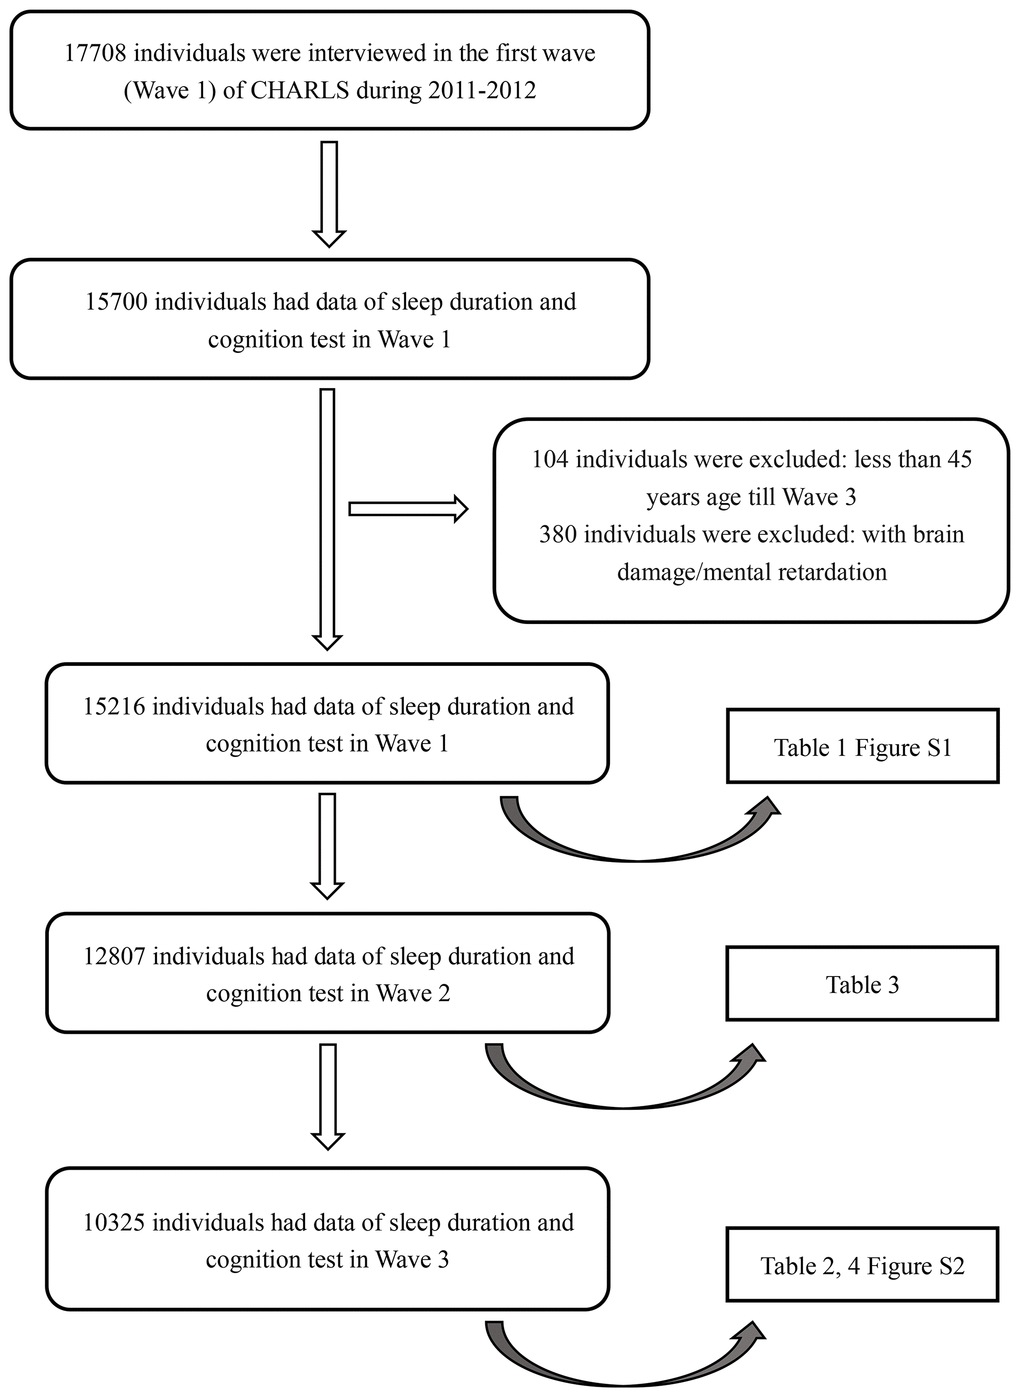 Flow chart of sample selection and the exclusion criteria.